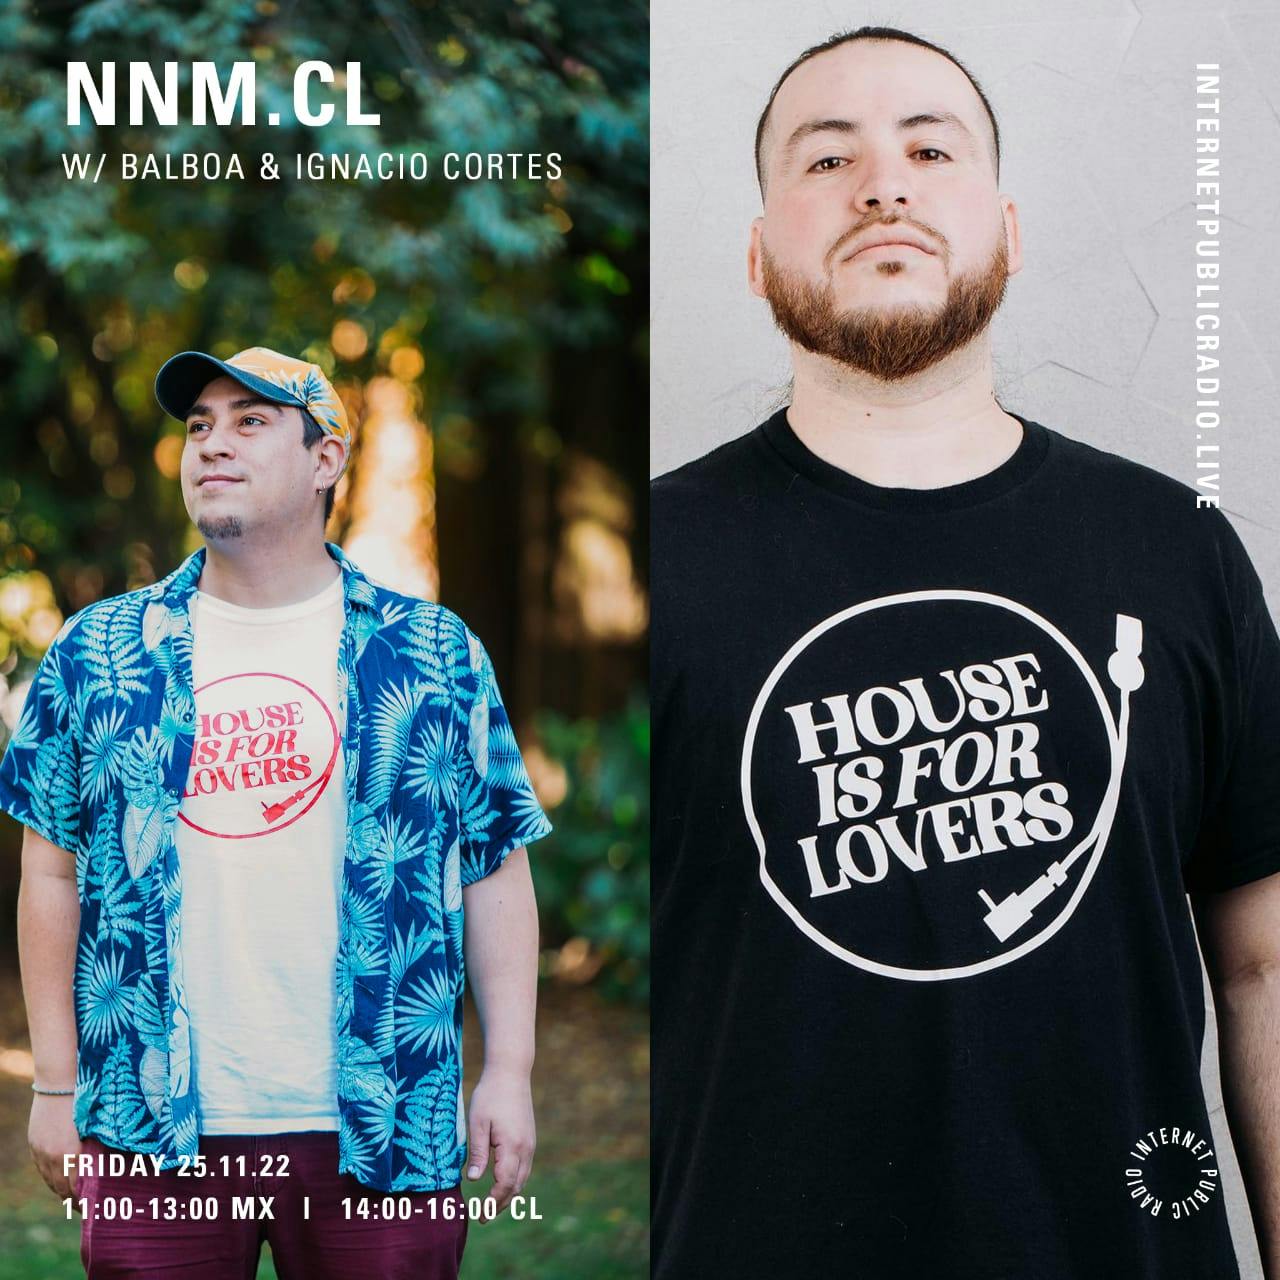 NNM.cl x IPR 032 w/ House is for Lovers